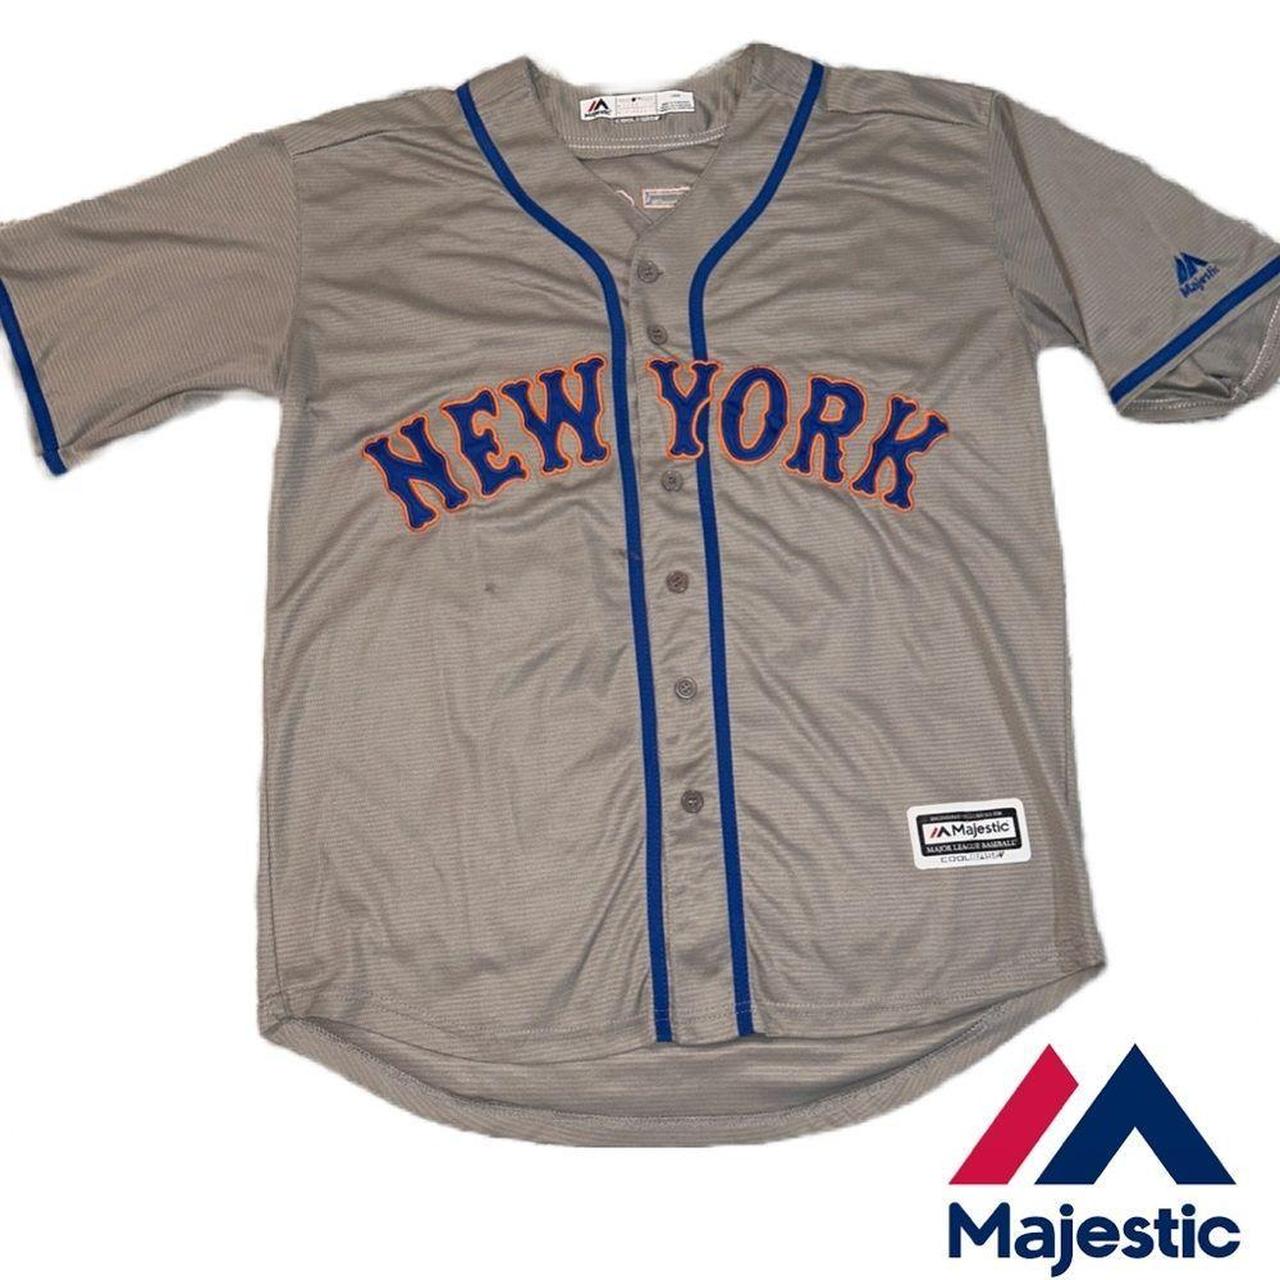 EUC Majestic NY Mets #30 Confronto Emroidered Cool - Depop